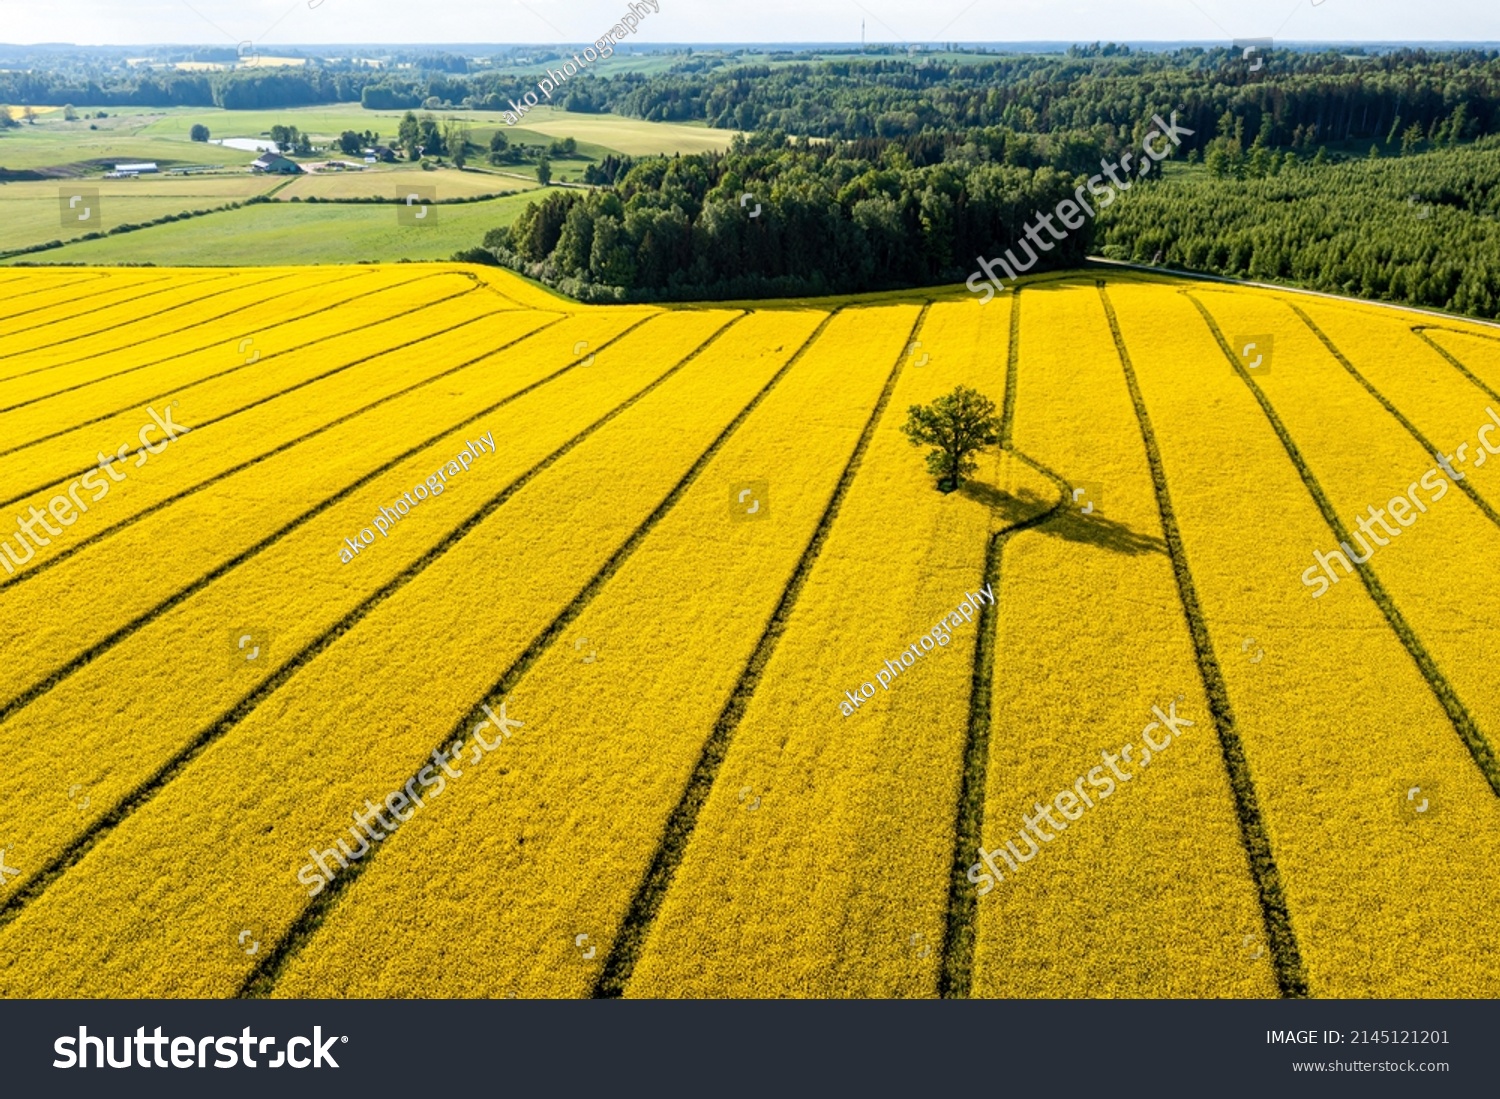 green trees in the middle of a large flowering yellow repe field, view from above #2145121201